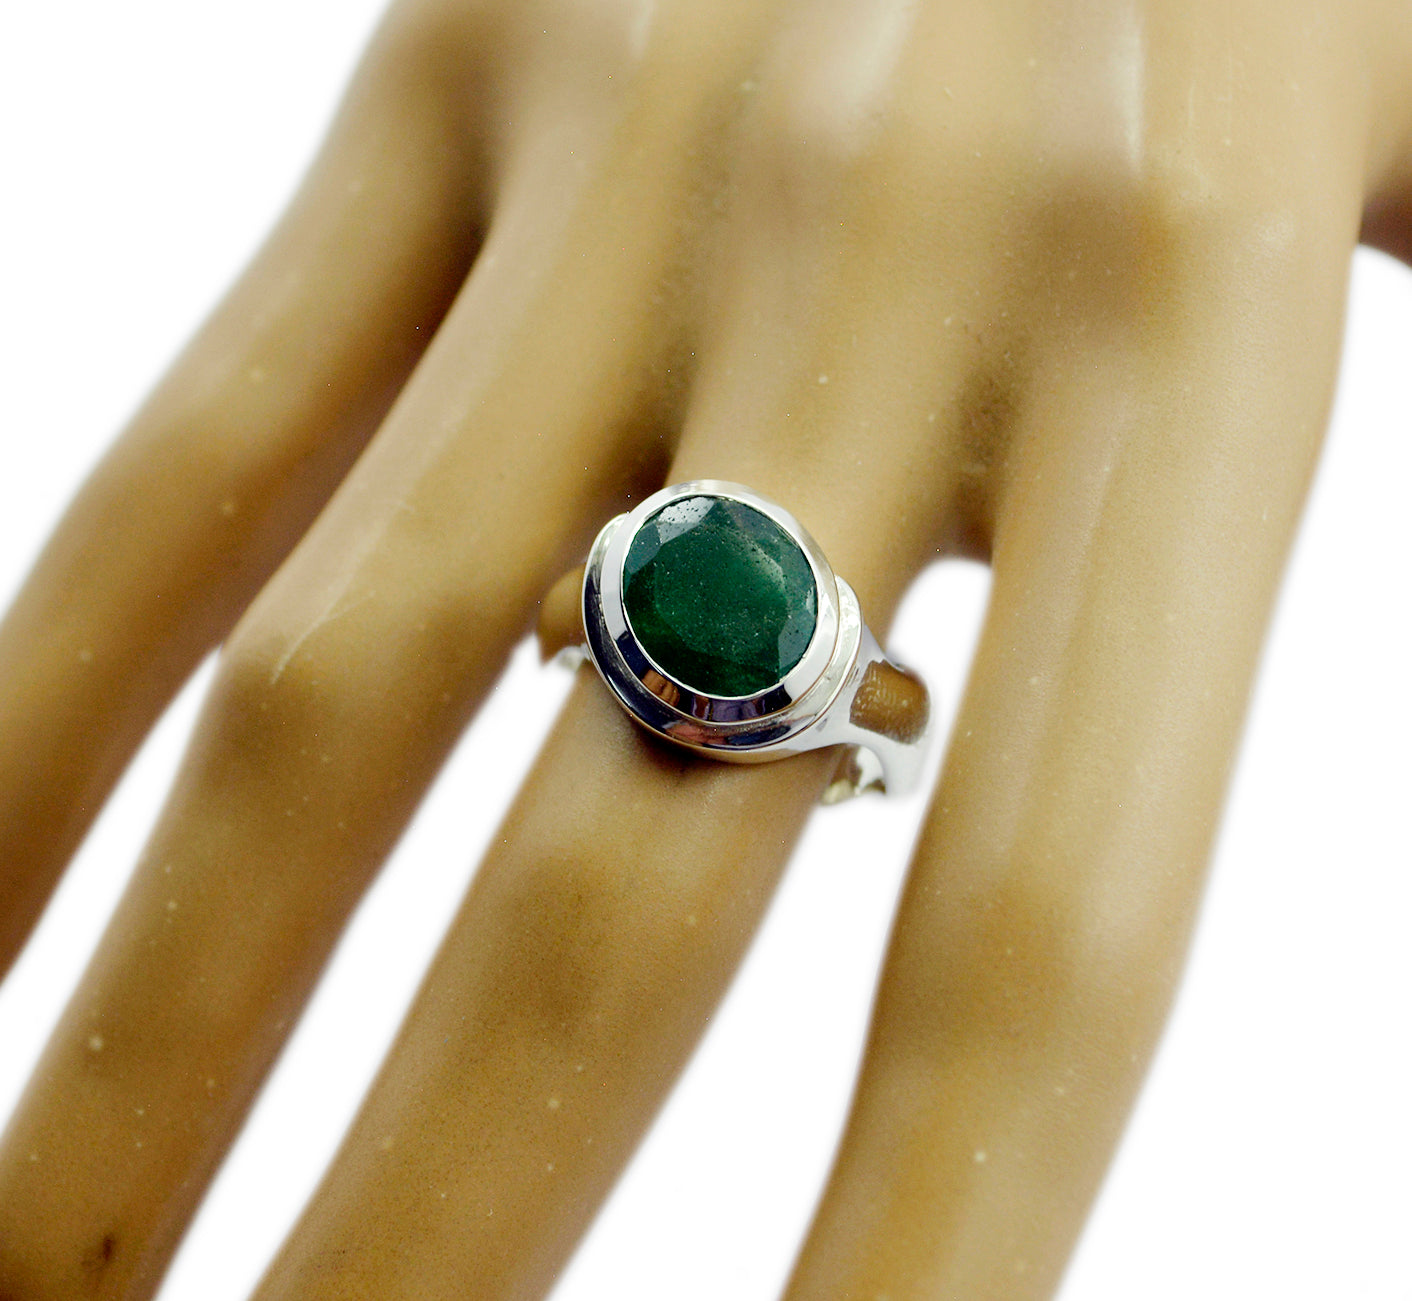 Good Gem Indianemerald 925 Sterling Silver Rings Jewelry For Her